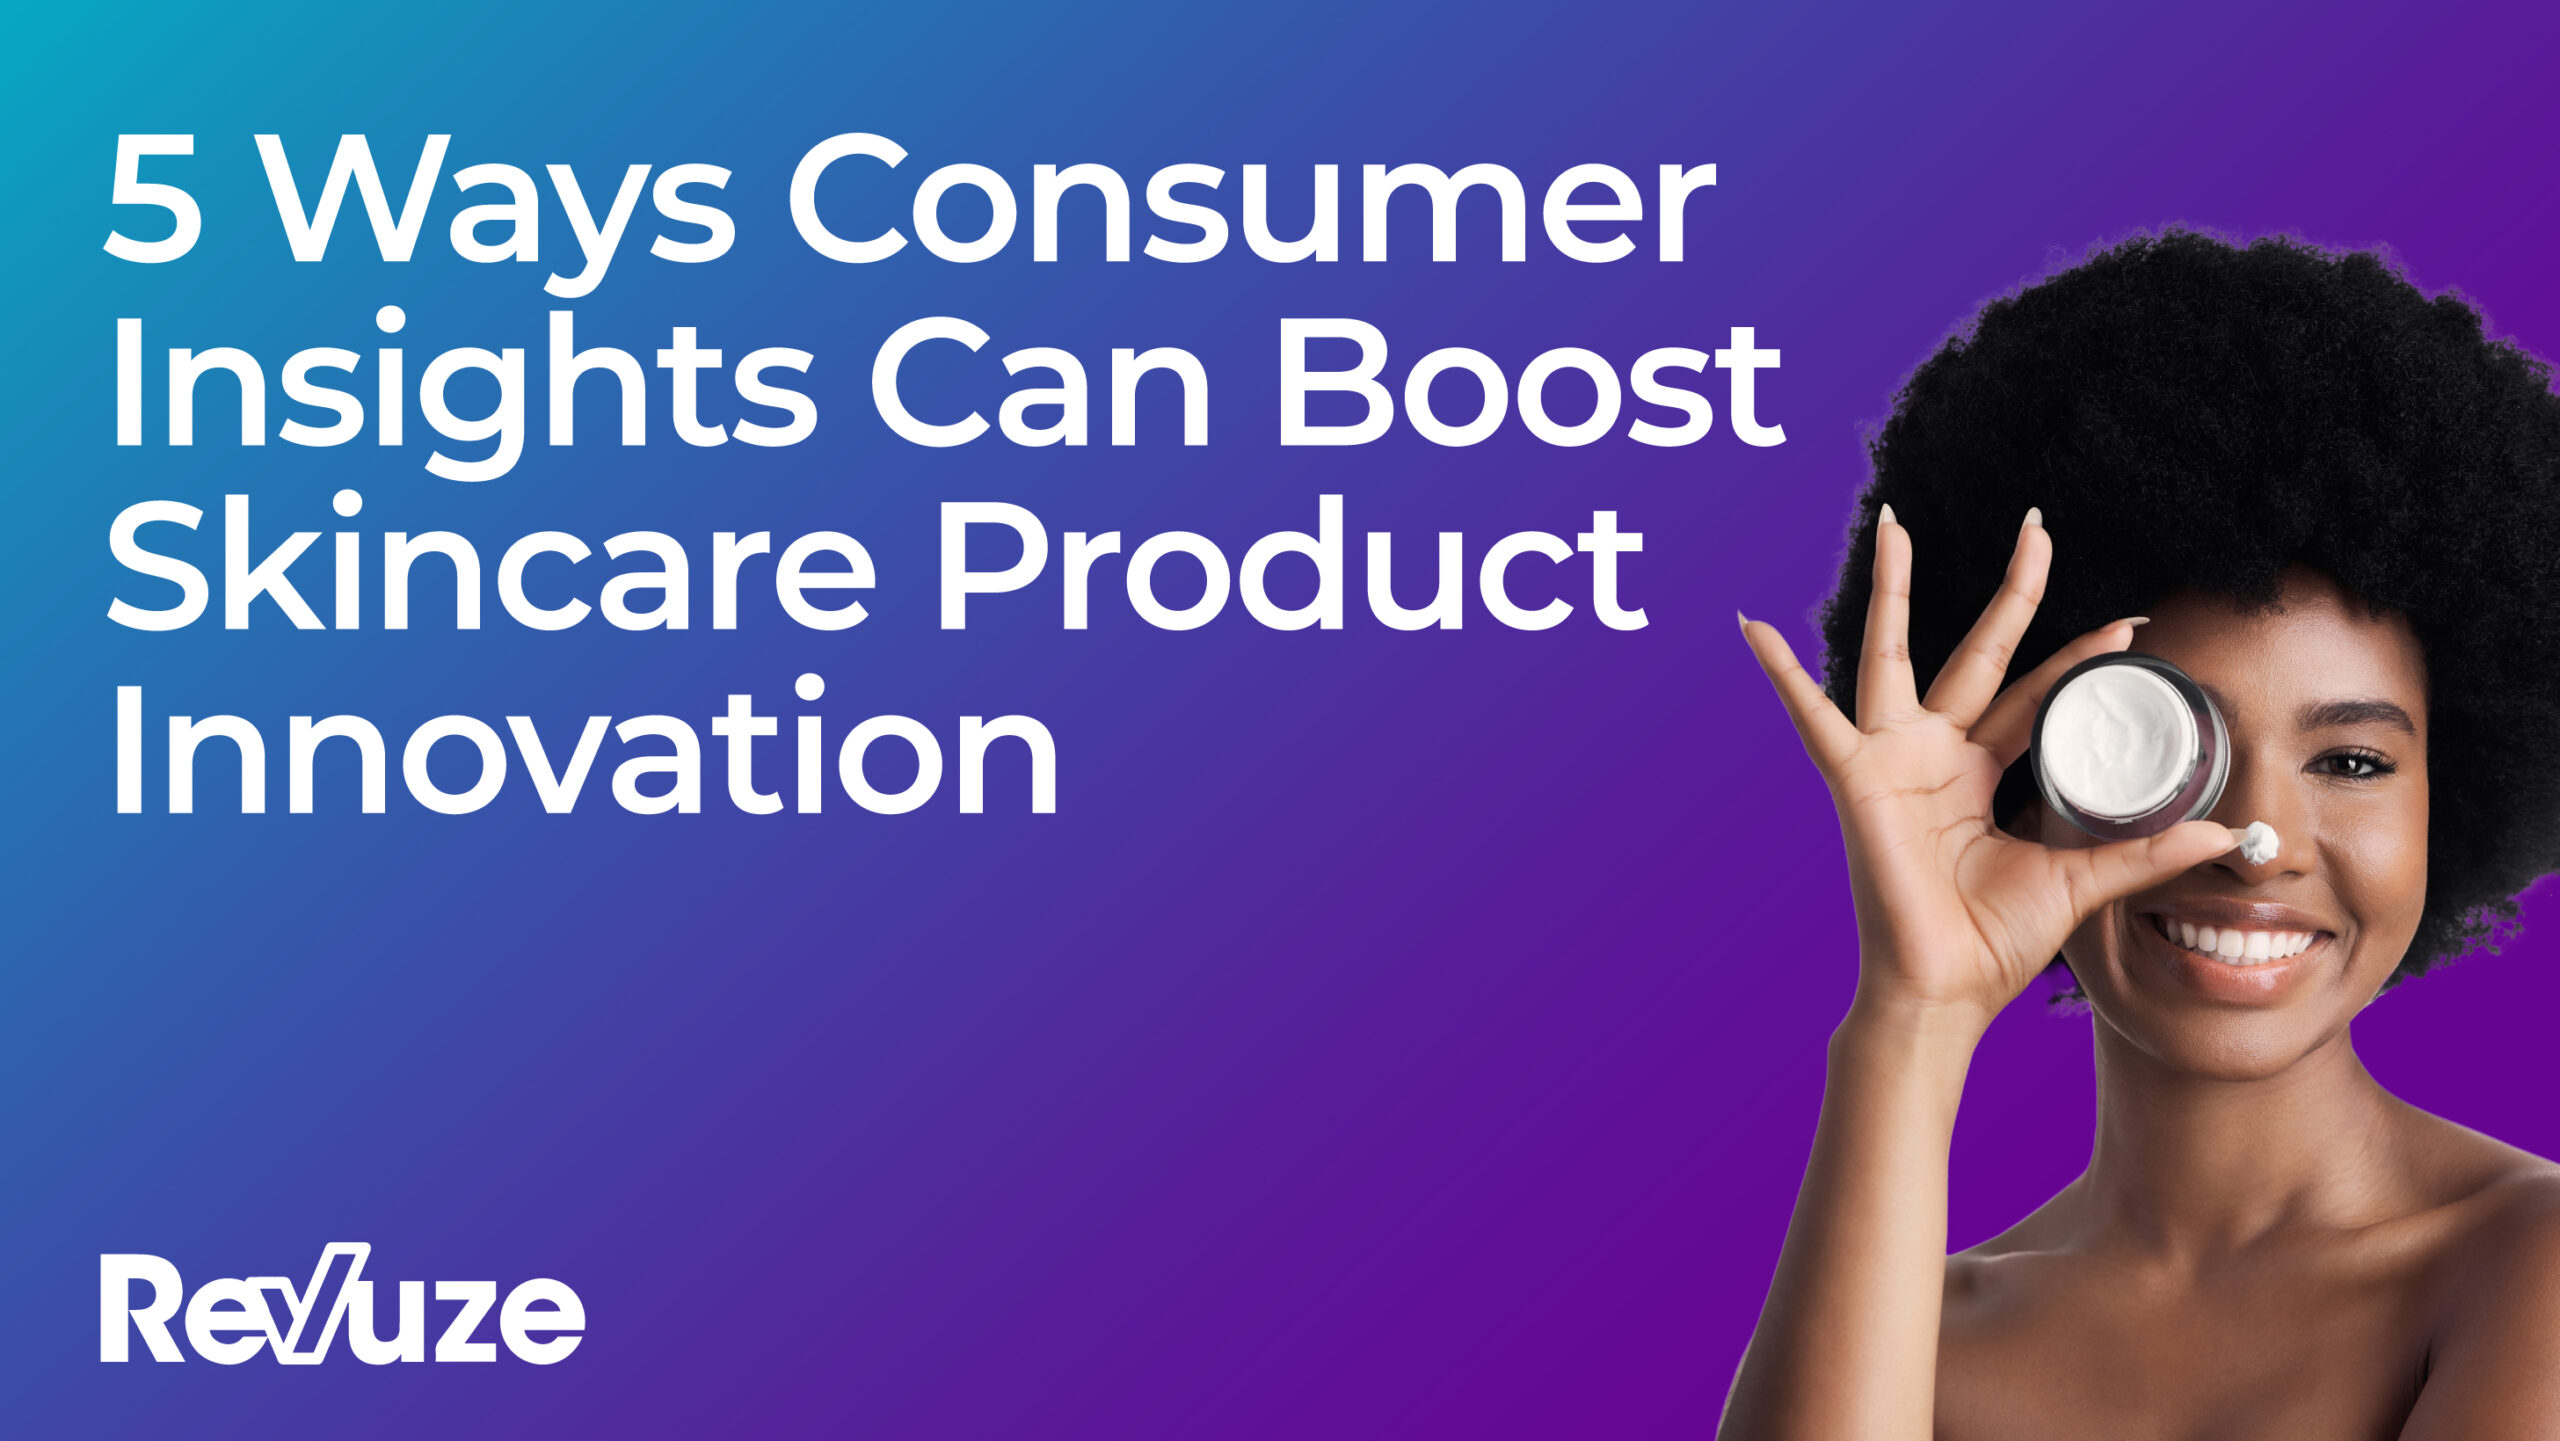 5 Ways Consumer Insights Can Boost Skincare Product Innovation